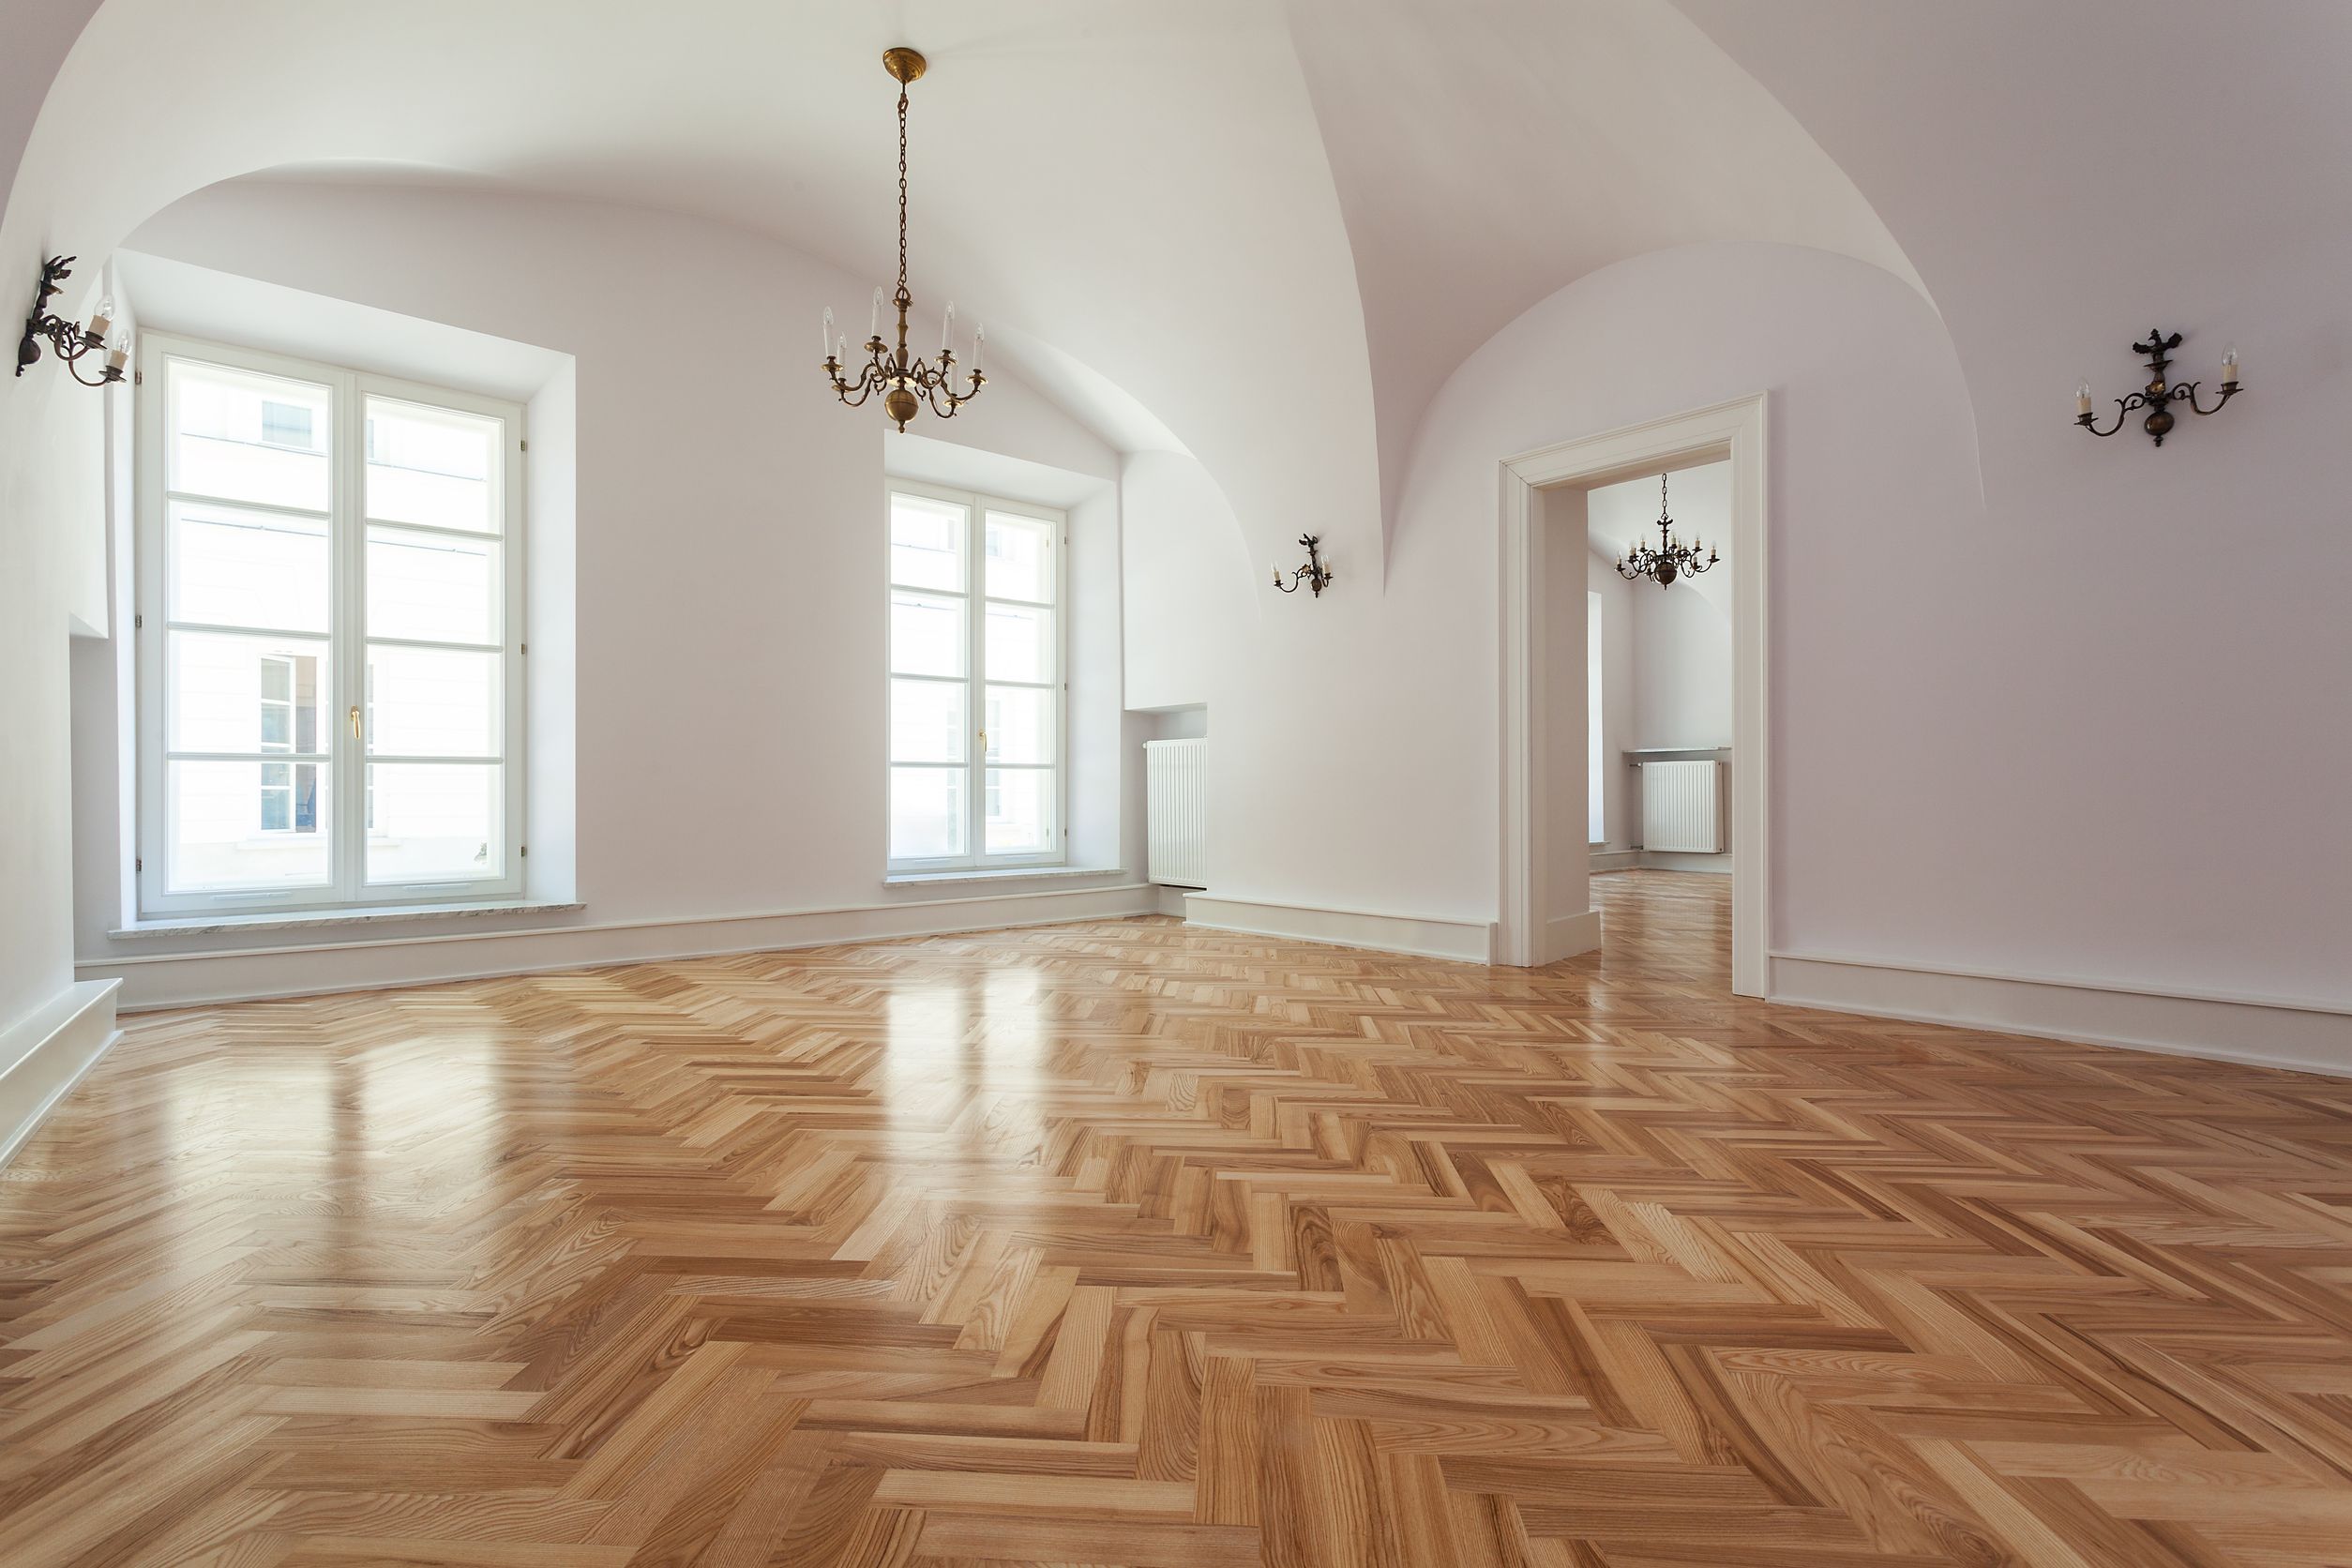 Why Choose Parquet Flooring And How To Install It